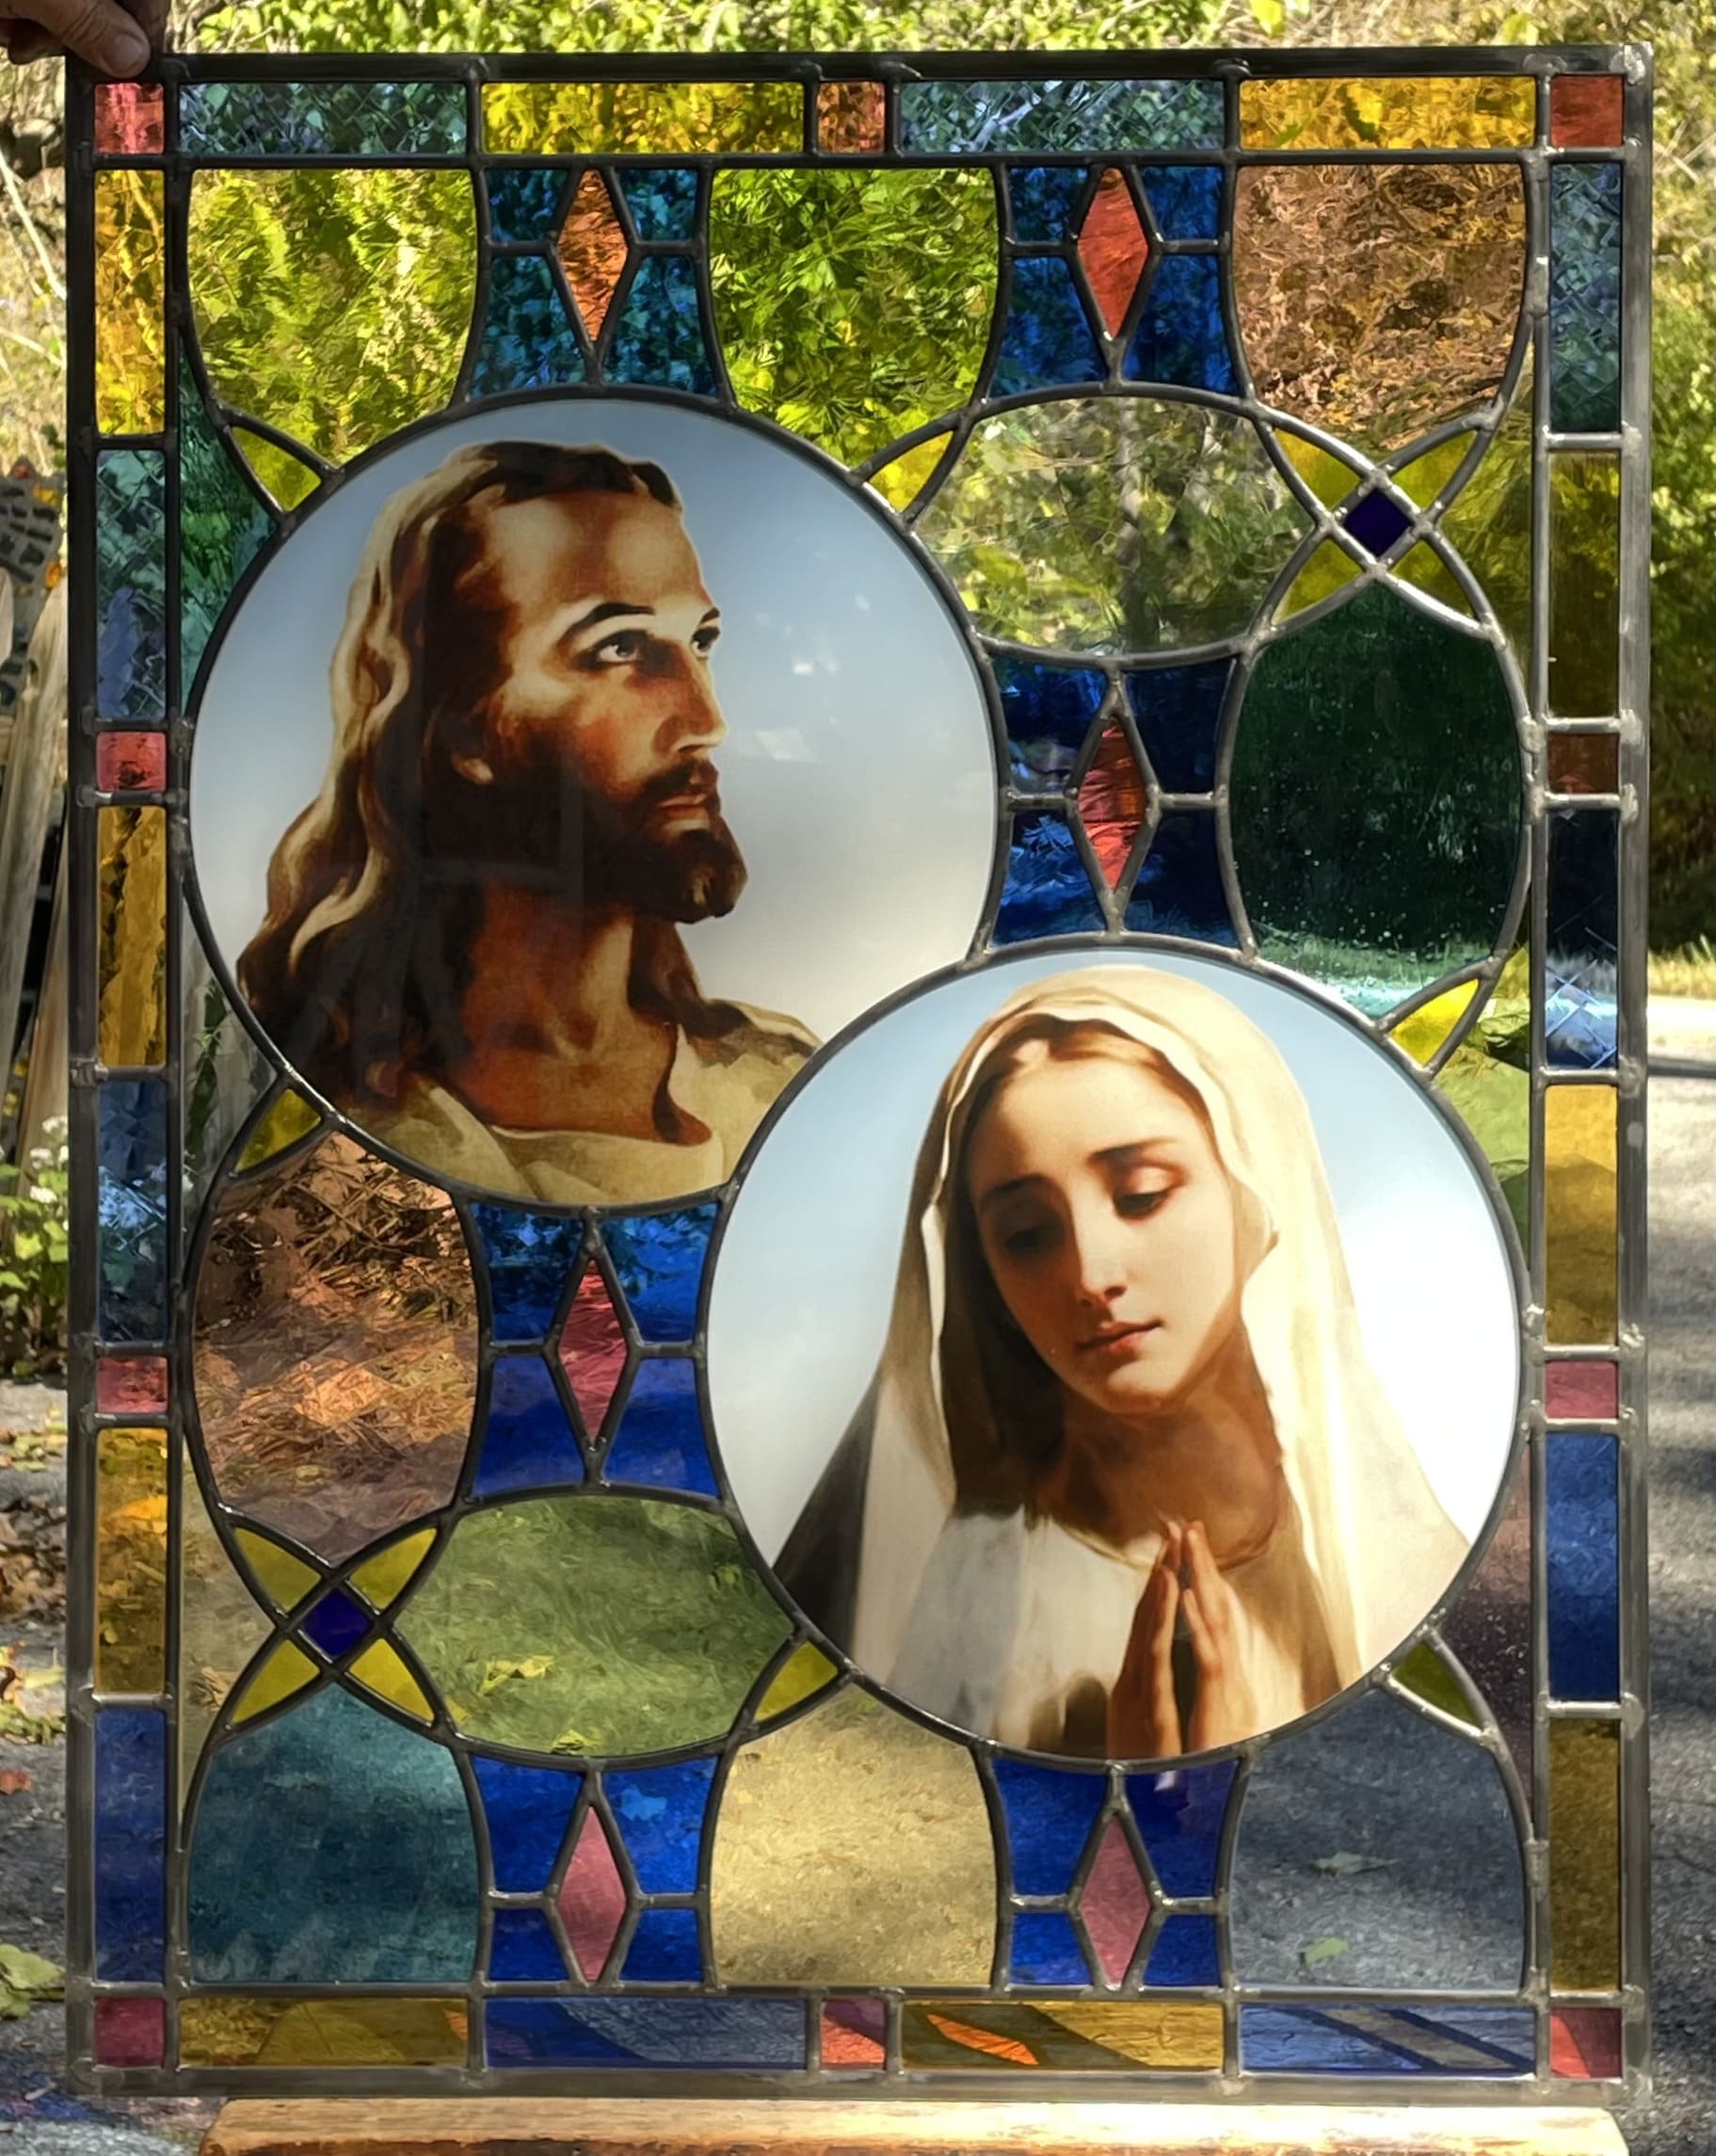 https://www.hollanderglass.com/assets/projects/printed-stained-glass-panel-2.jpg